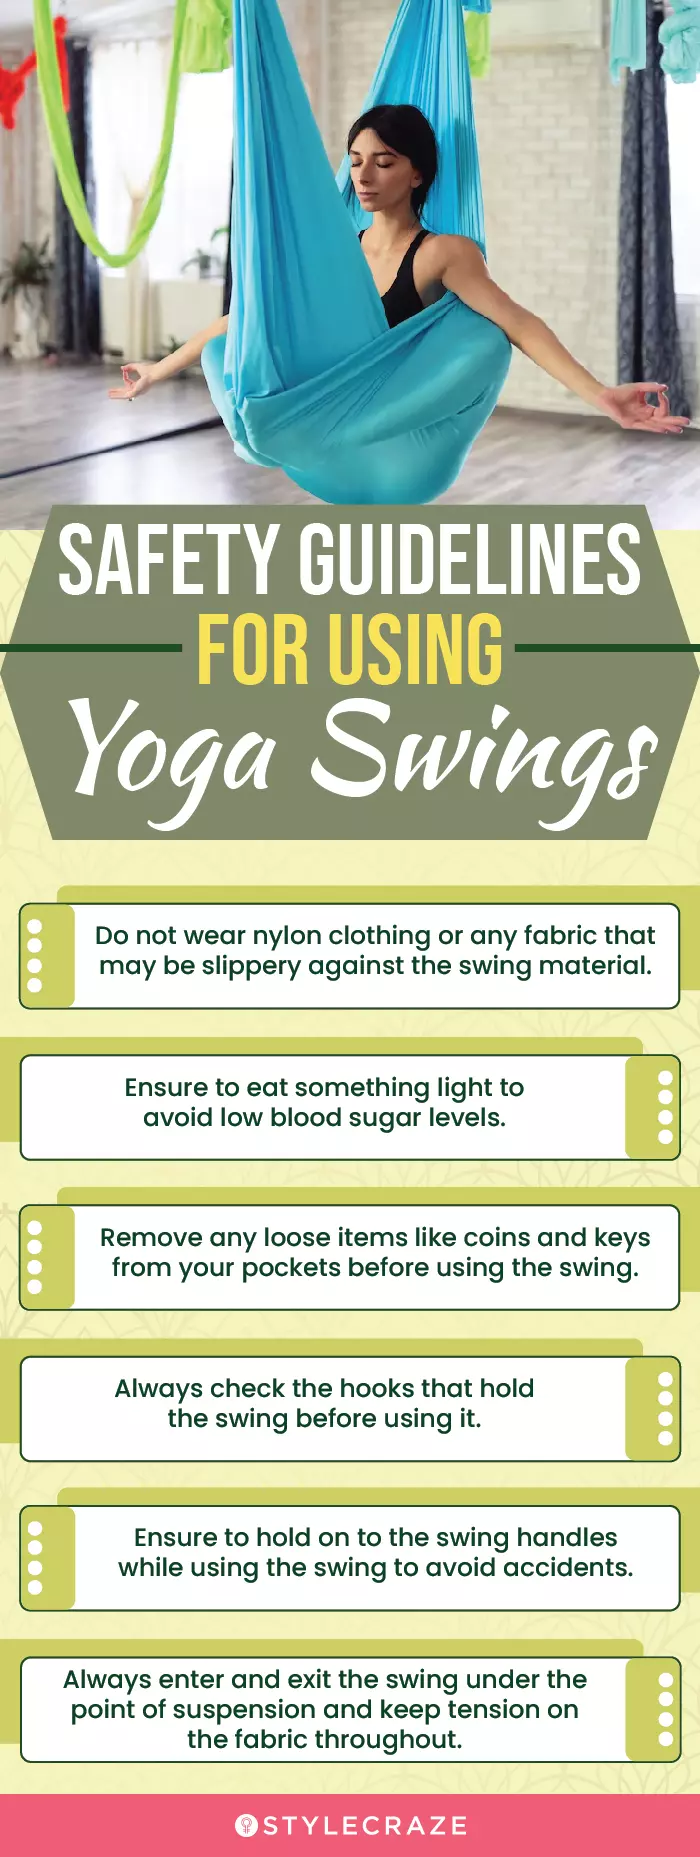 Safety Guidelines For Using Yoga Swings (infographic)